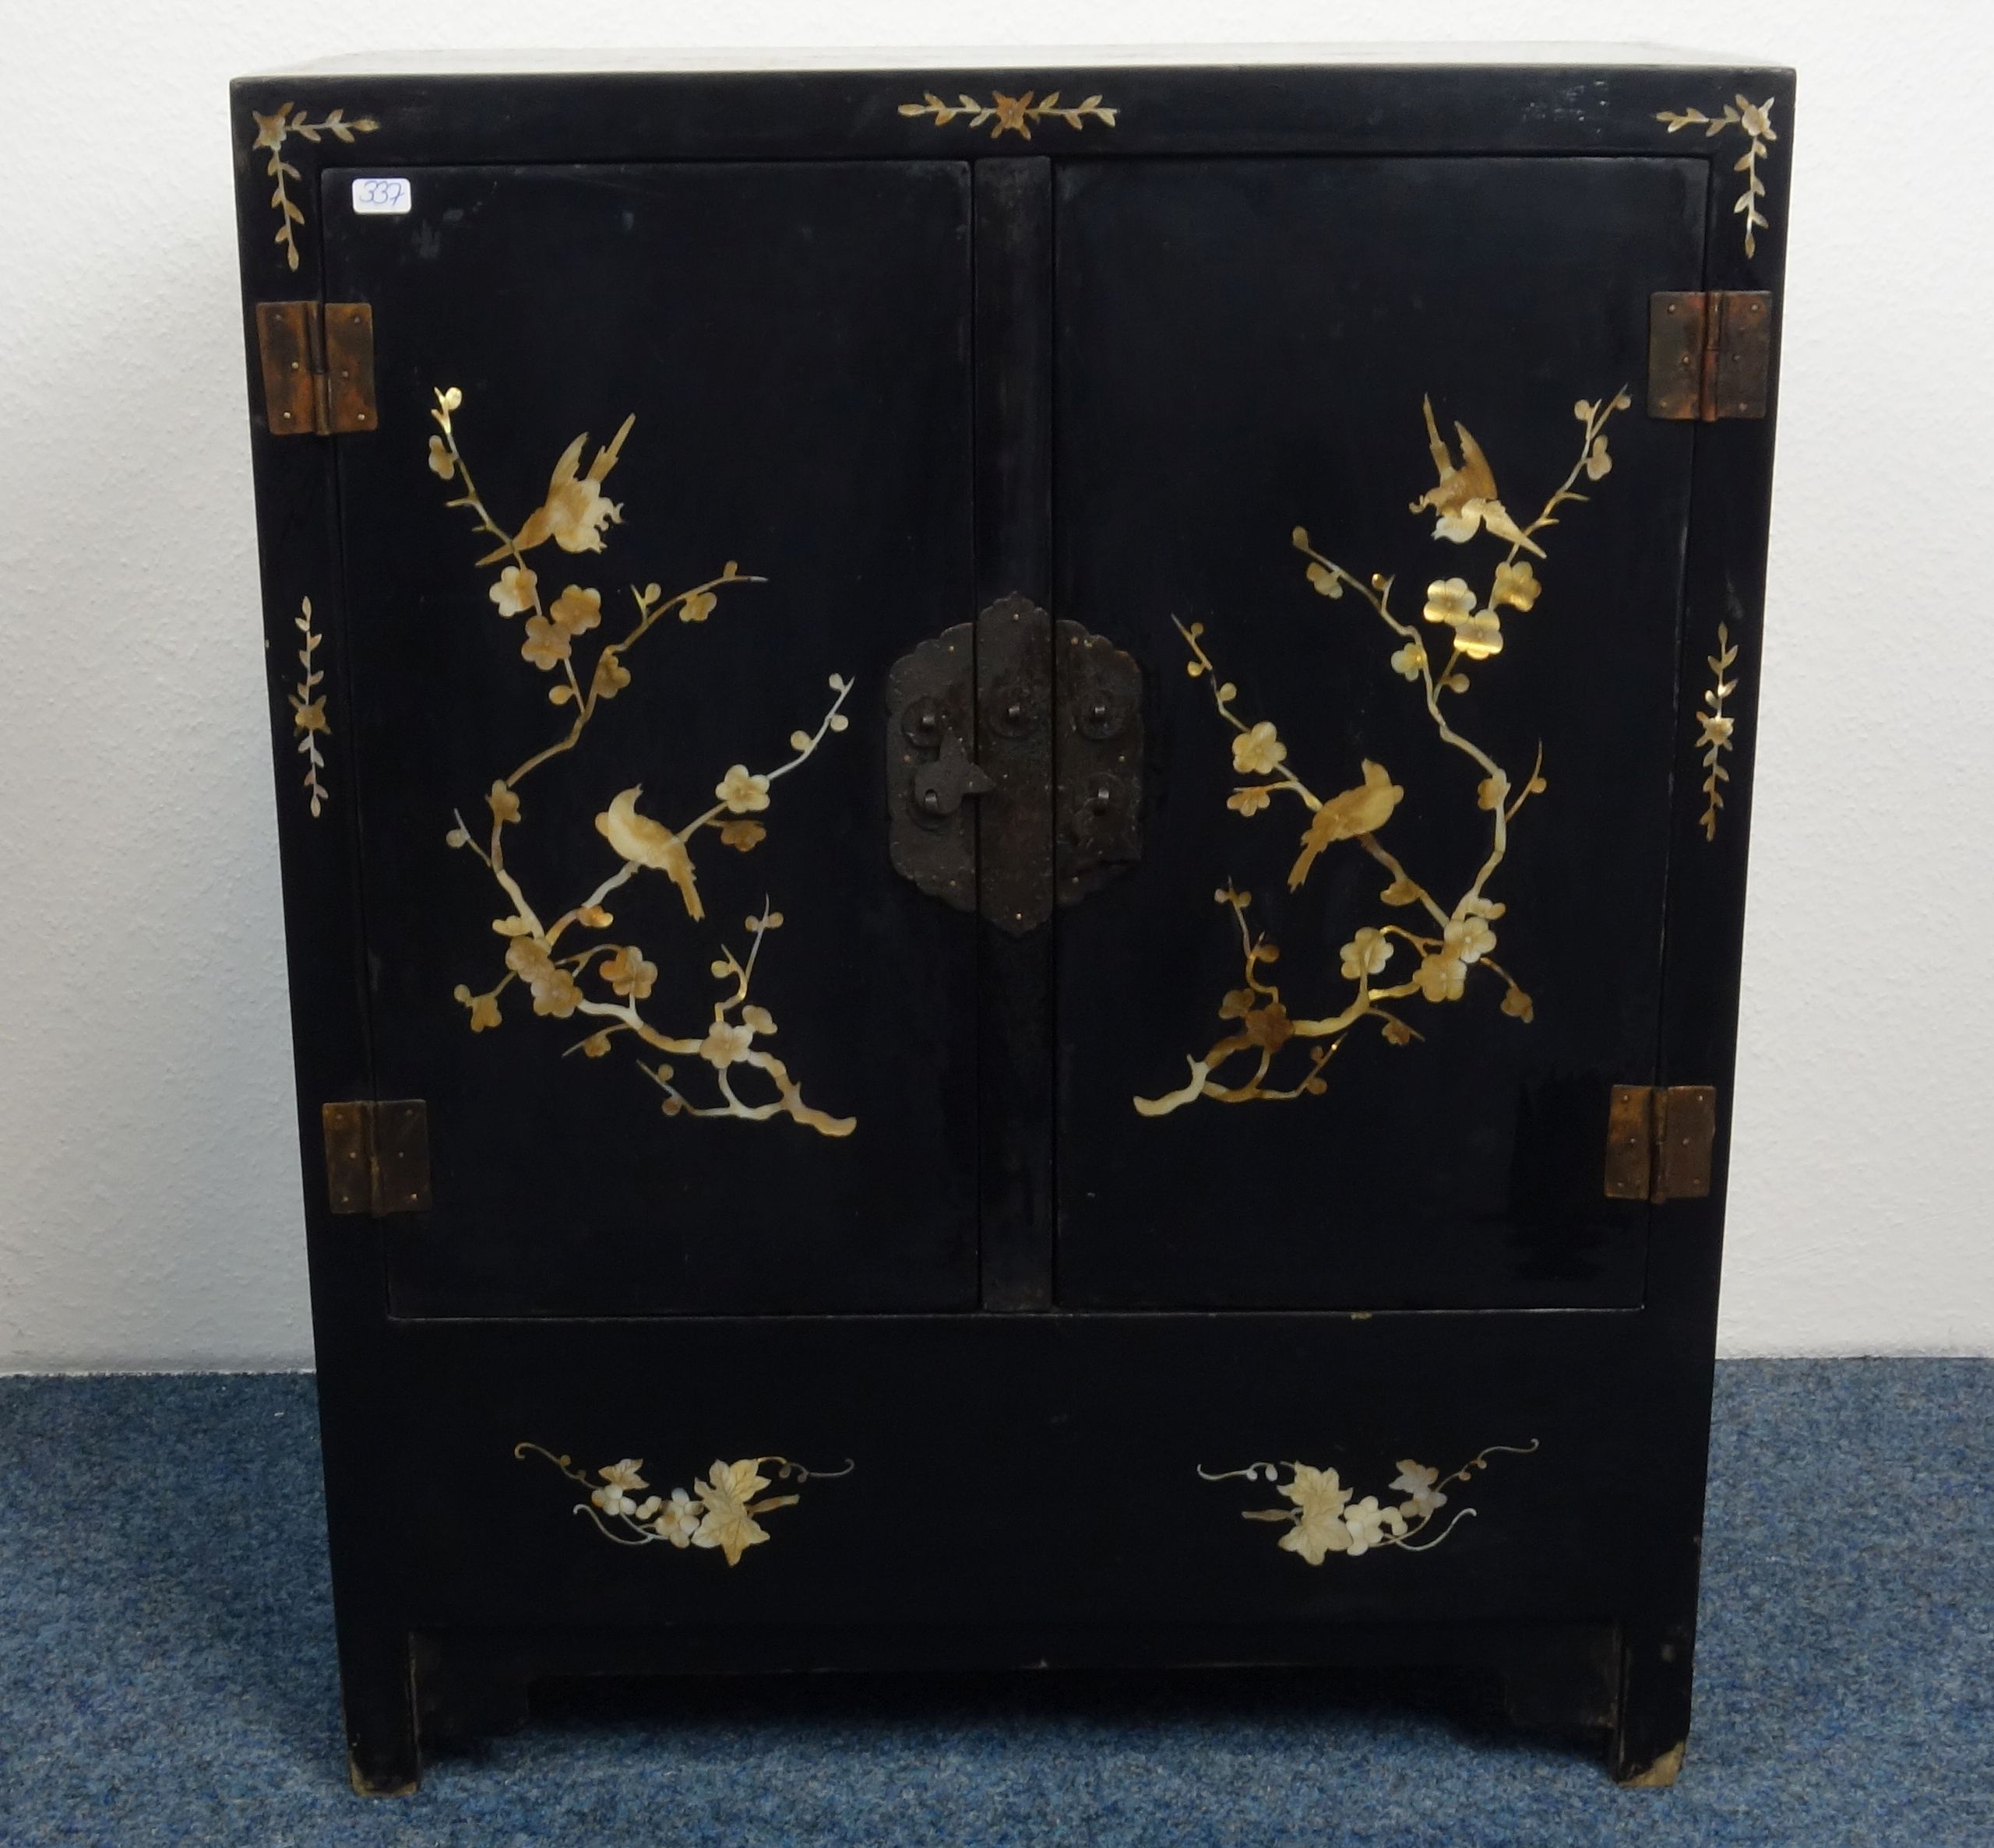 LACQUER CABINET WITH MOTHER OF PEARL MARKETERIES